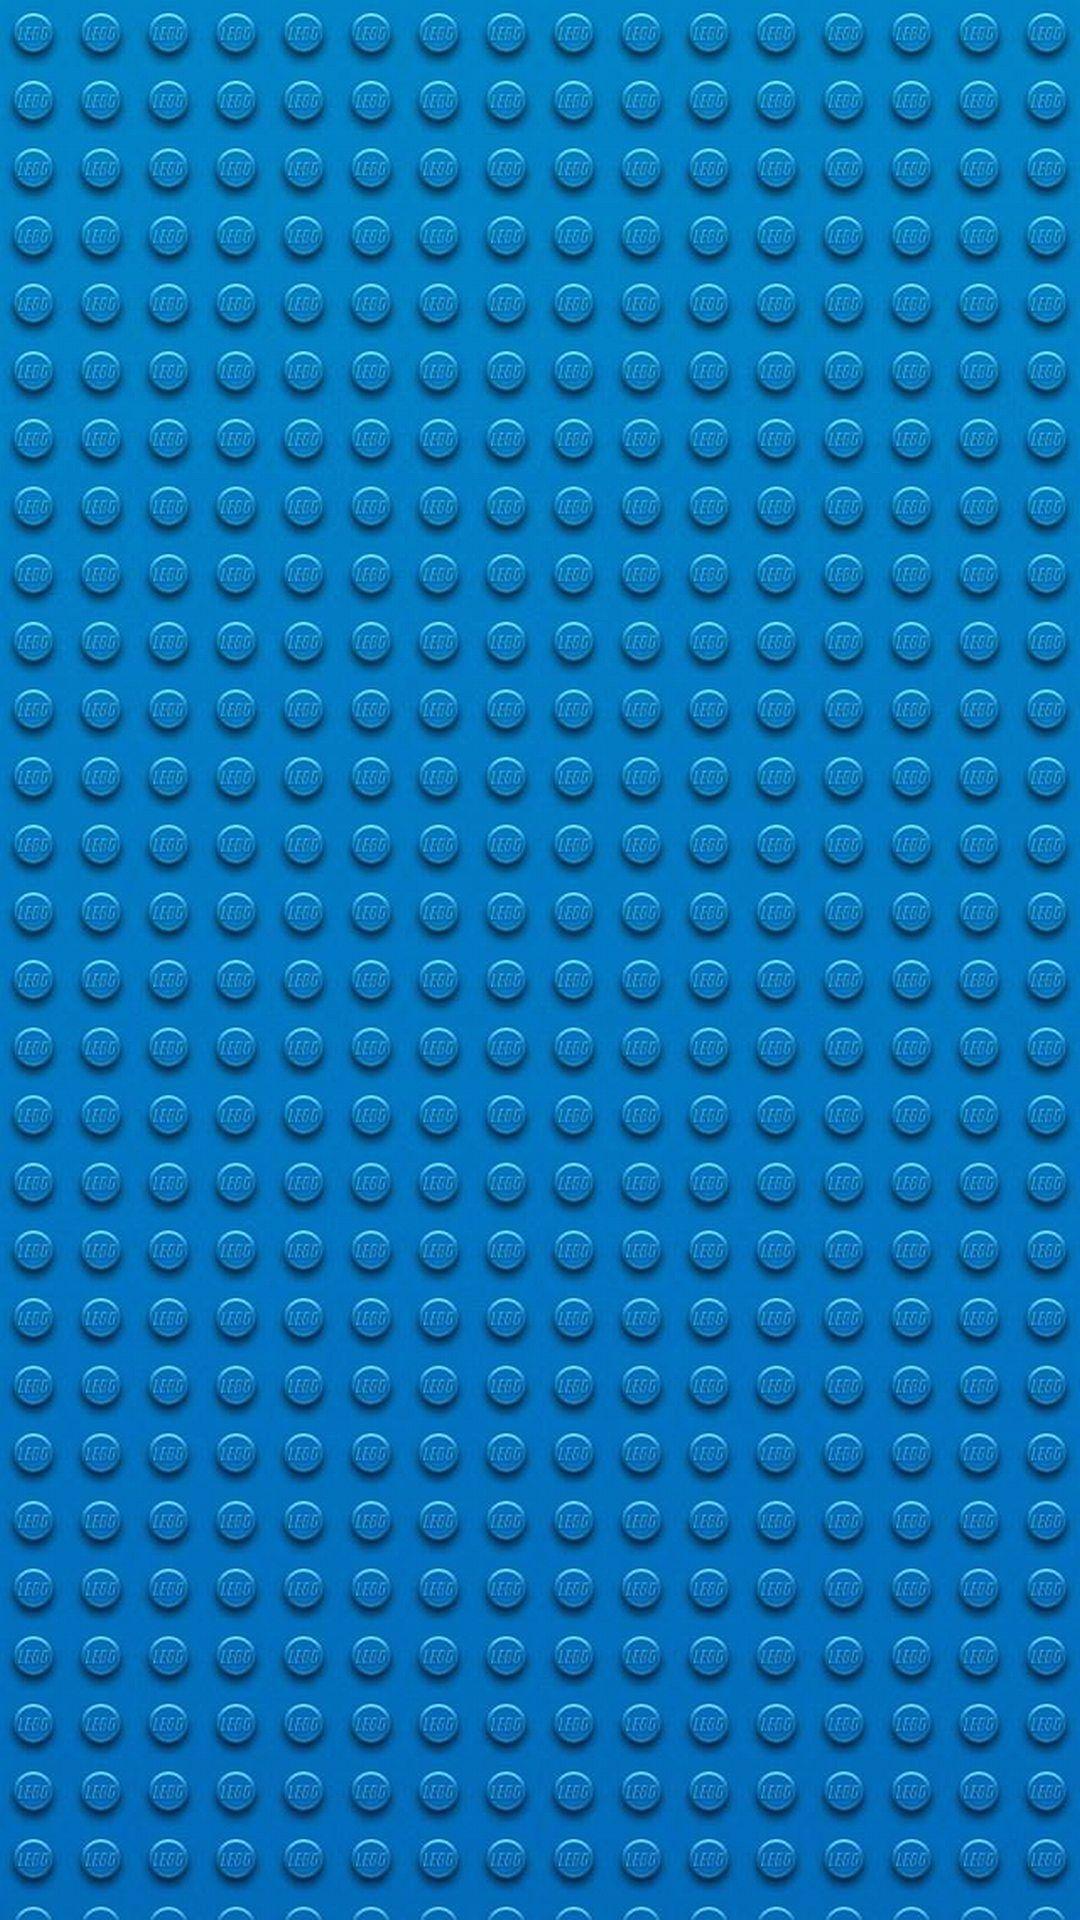 Lego Phone Wallpapers Top Free Lego Phone Backgrounds Wallpaperaccess